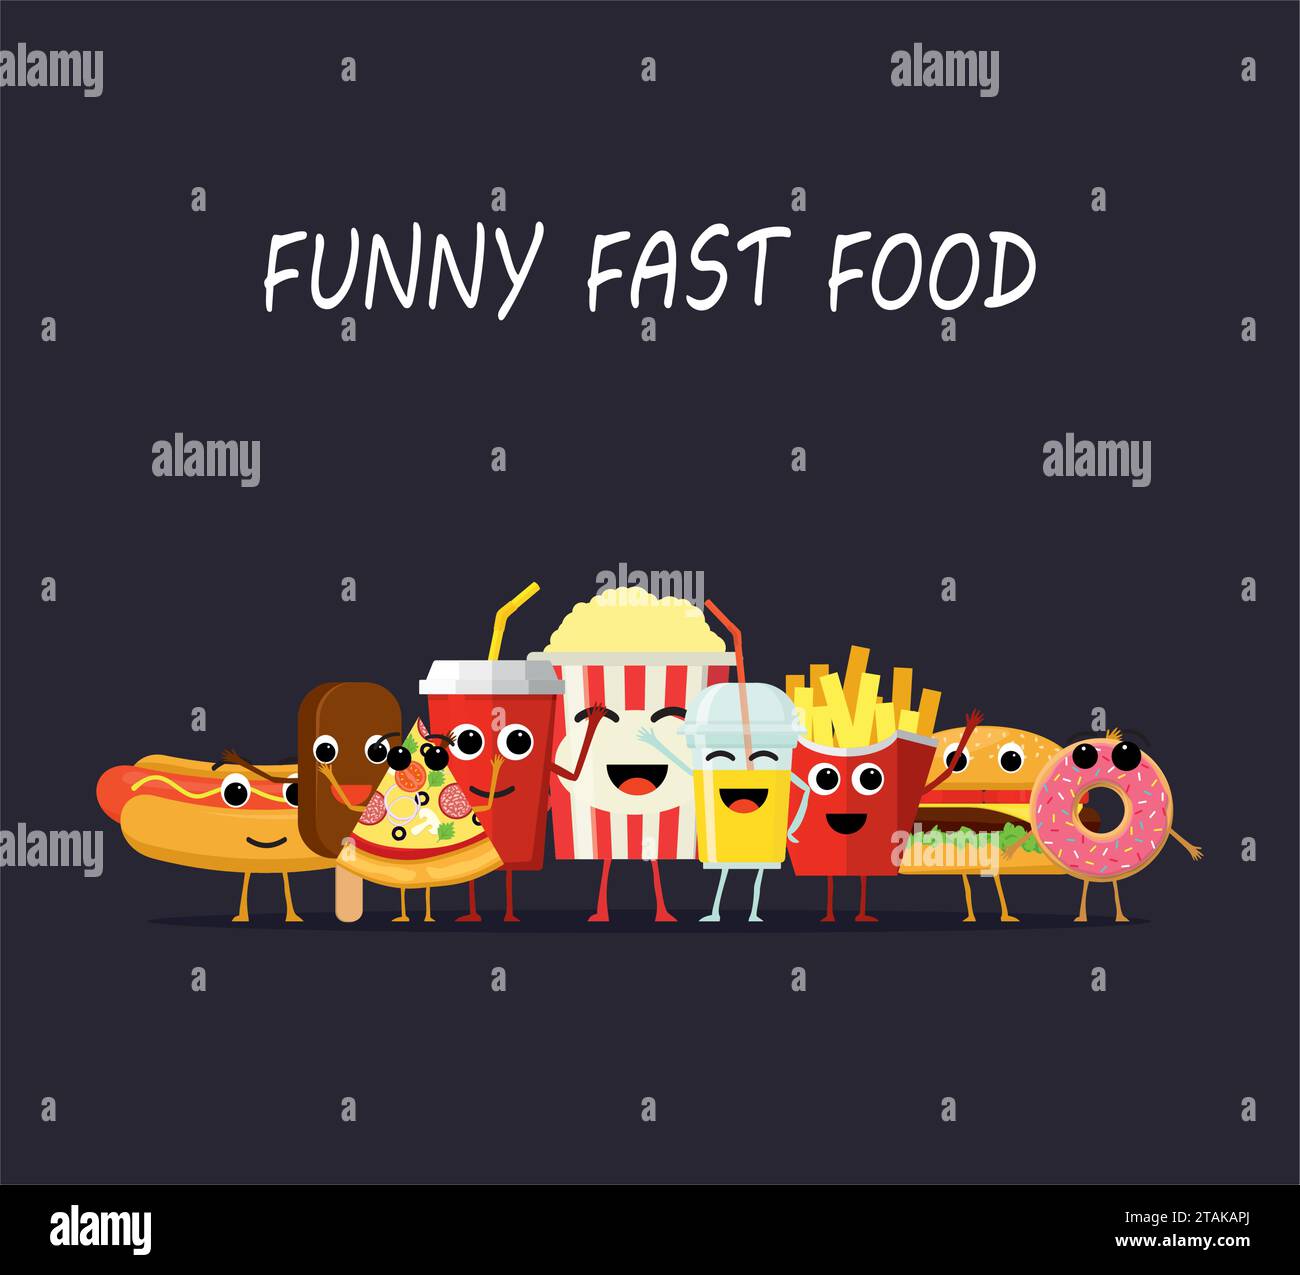 Funny fast food characters isolated on dark background. Happy smile cartoon face fastfood, comical snack vector illustartion Stock Vector